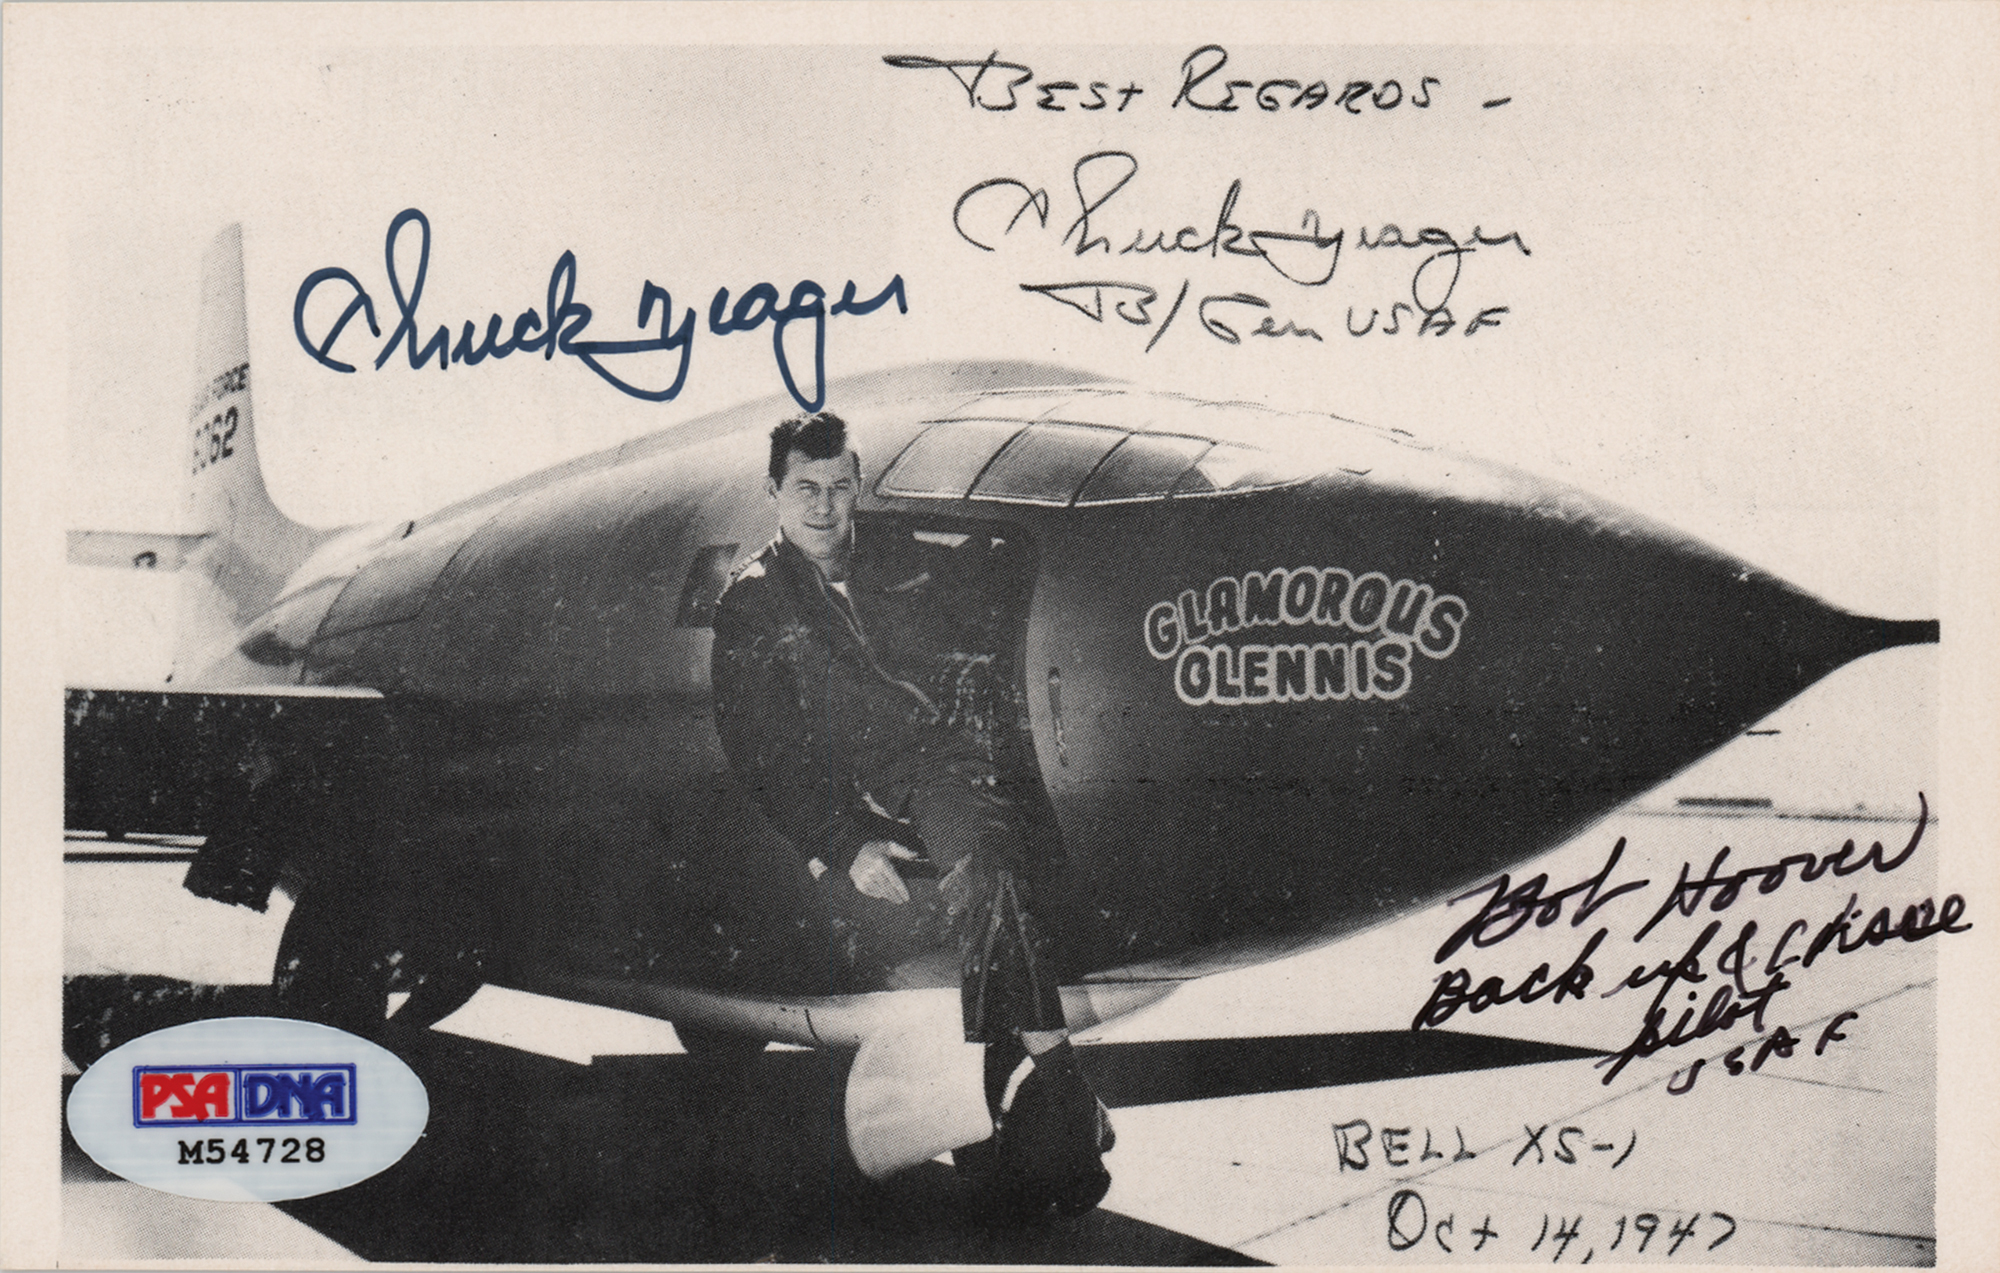 Lot #7816 Chuck Yeager and Bob Hoover Signed Photograph